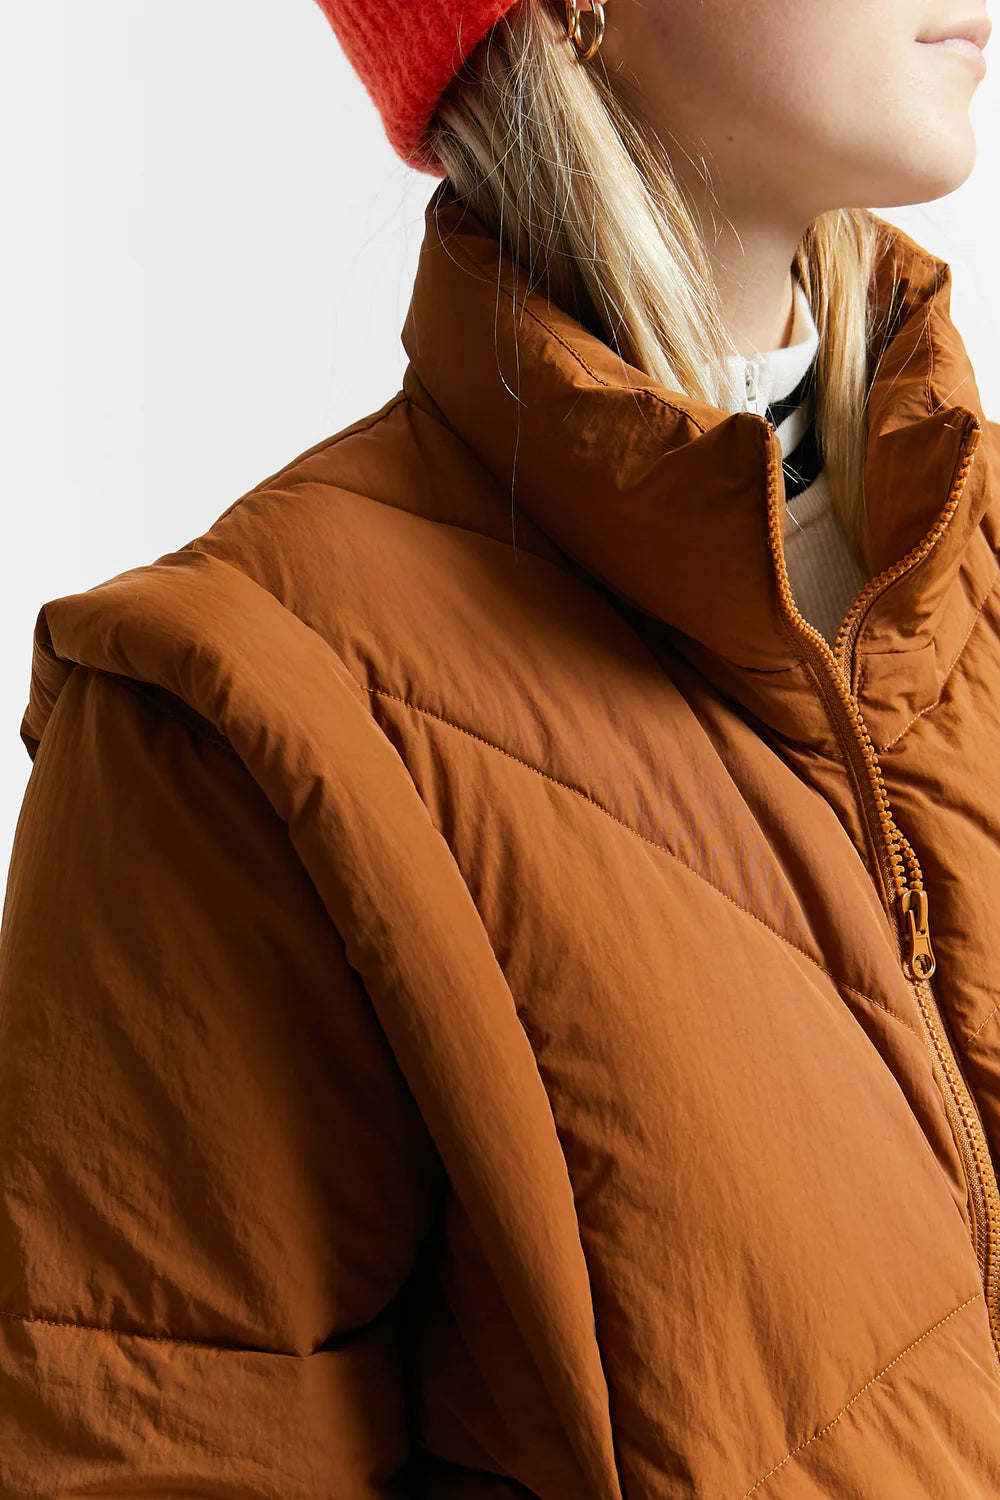 THE NEW SOCIETY OWINGS PUFFER JACKET CAMEL